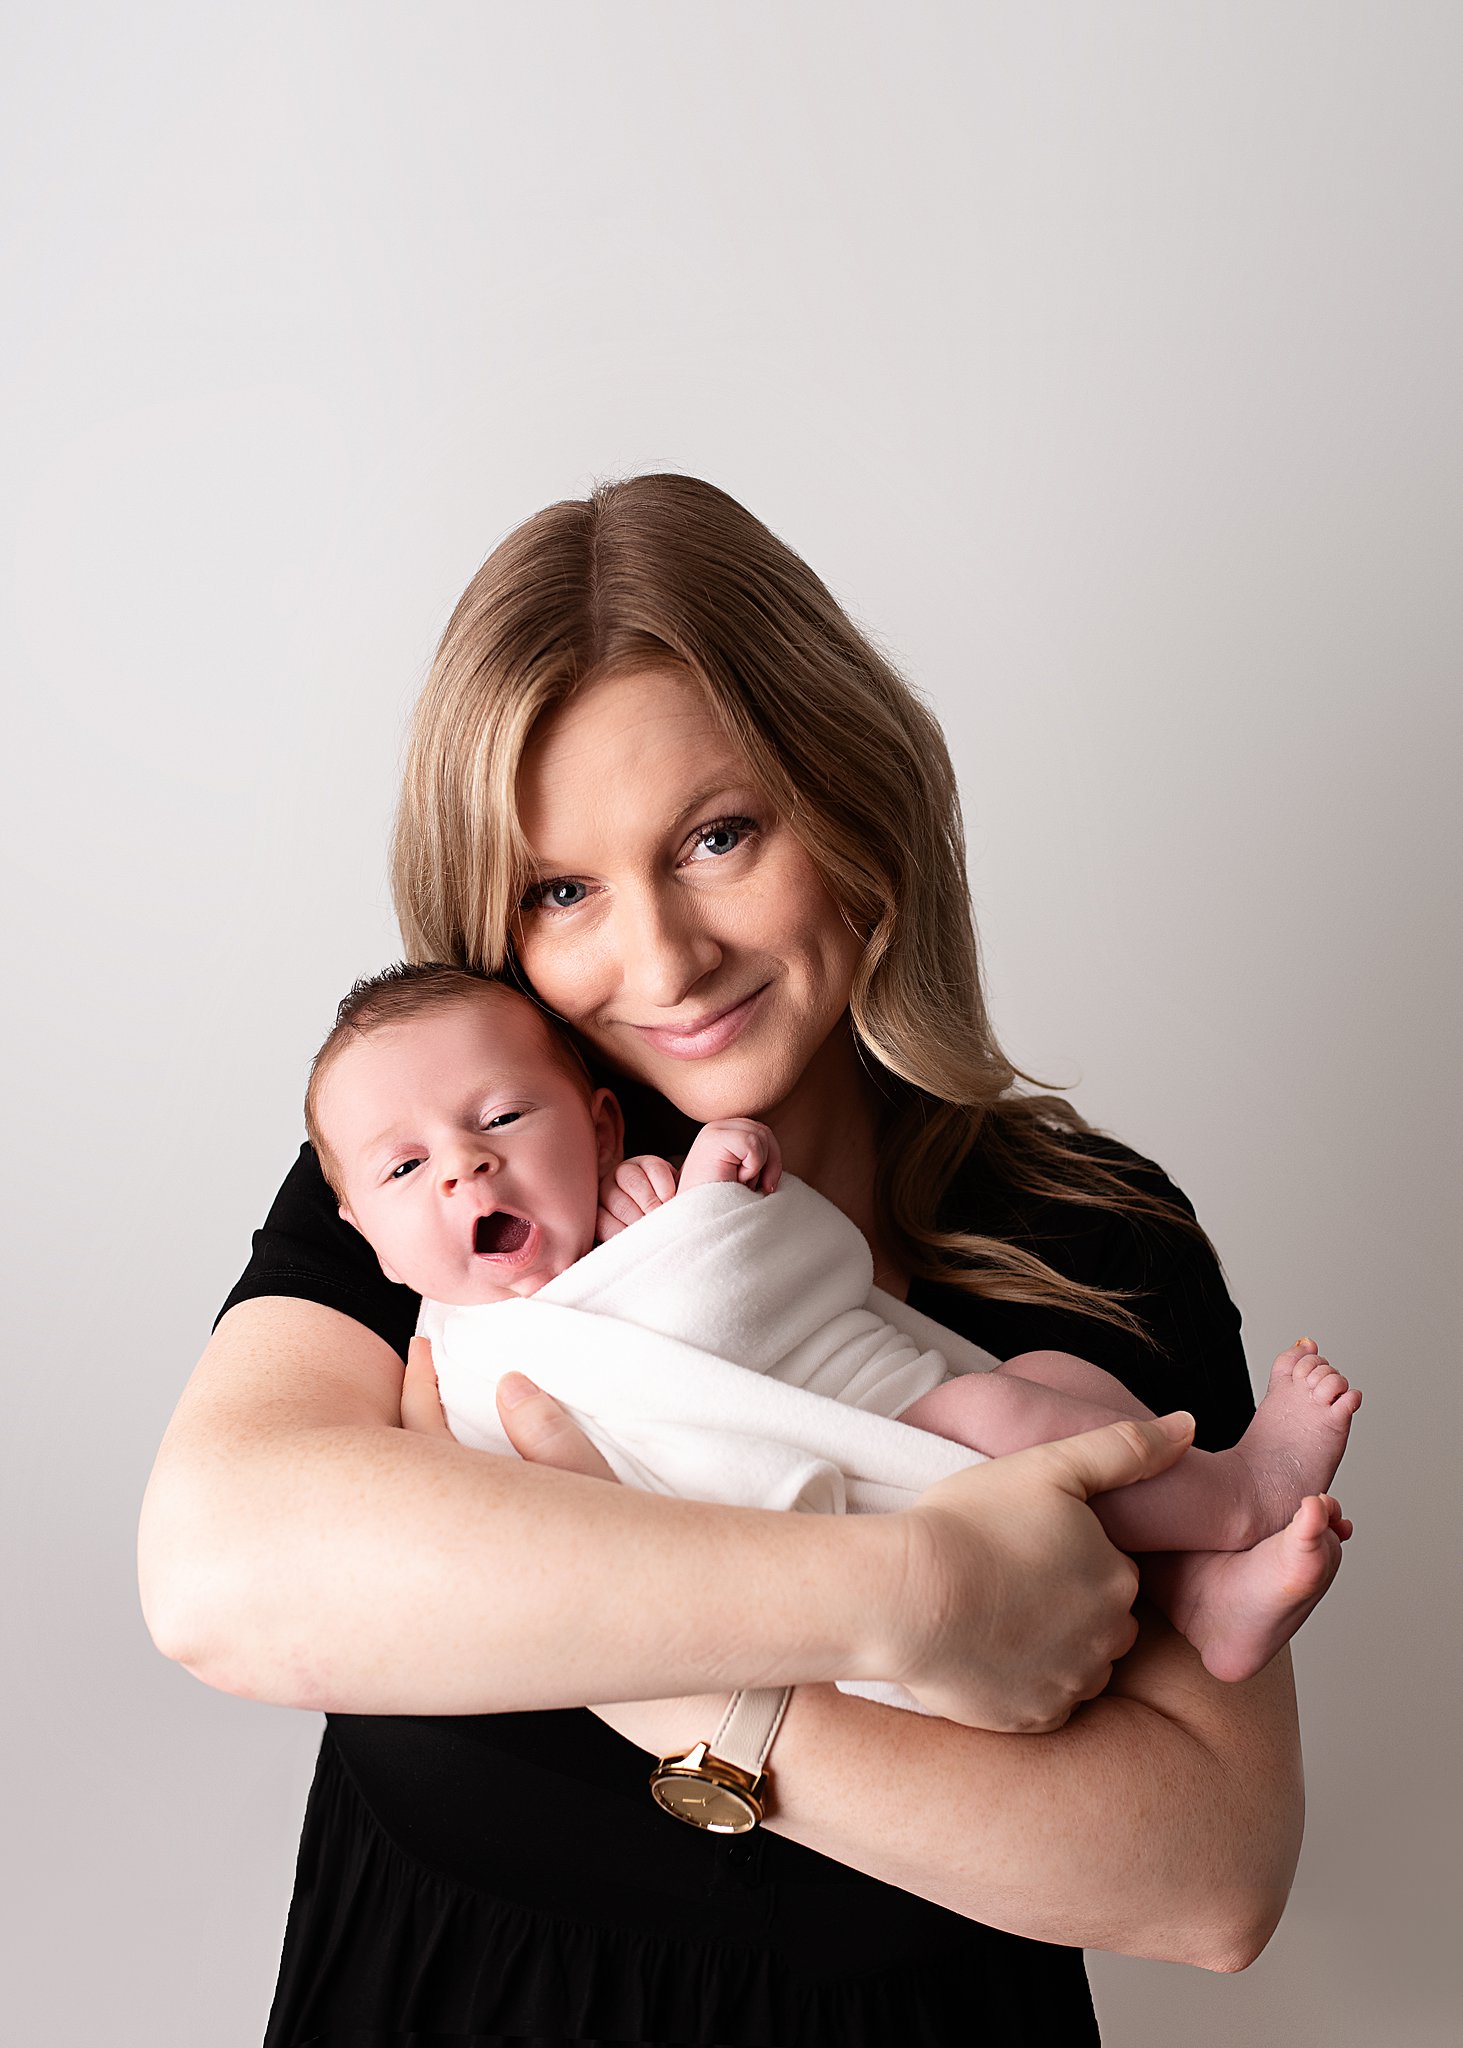 A new mom cradles her yawning newborn baby in her arms while standing in a studio